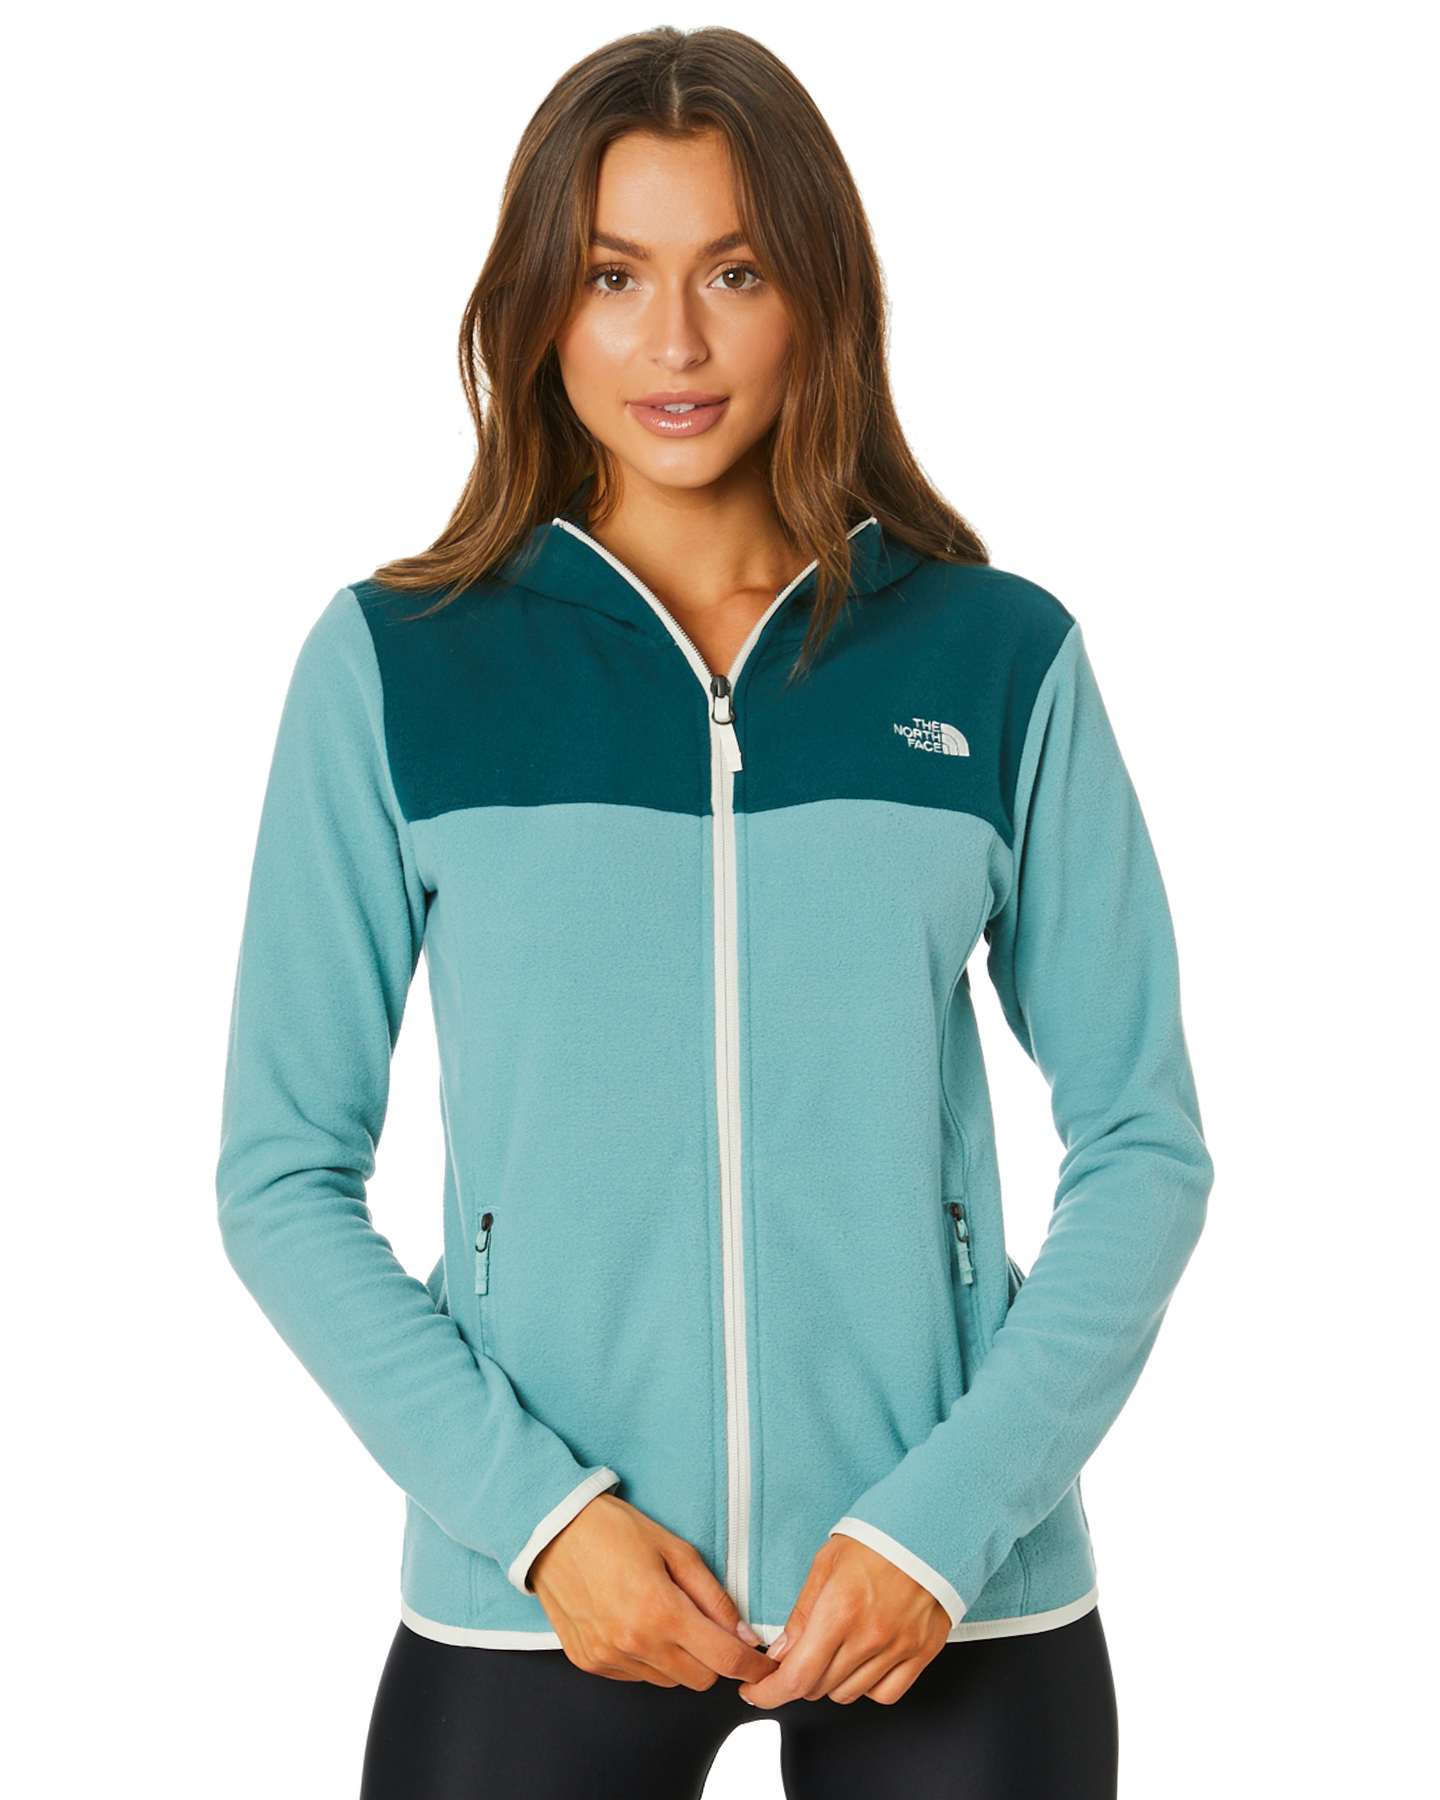 North Face Tka Glacier Clearance, 59% OFF | empow-her.com